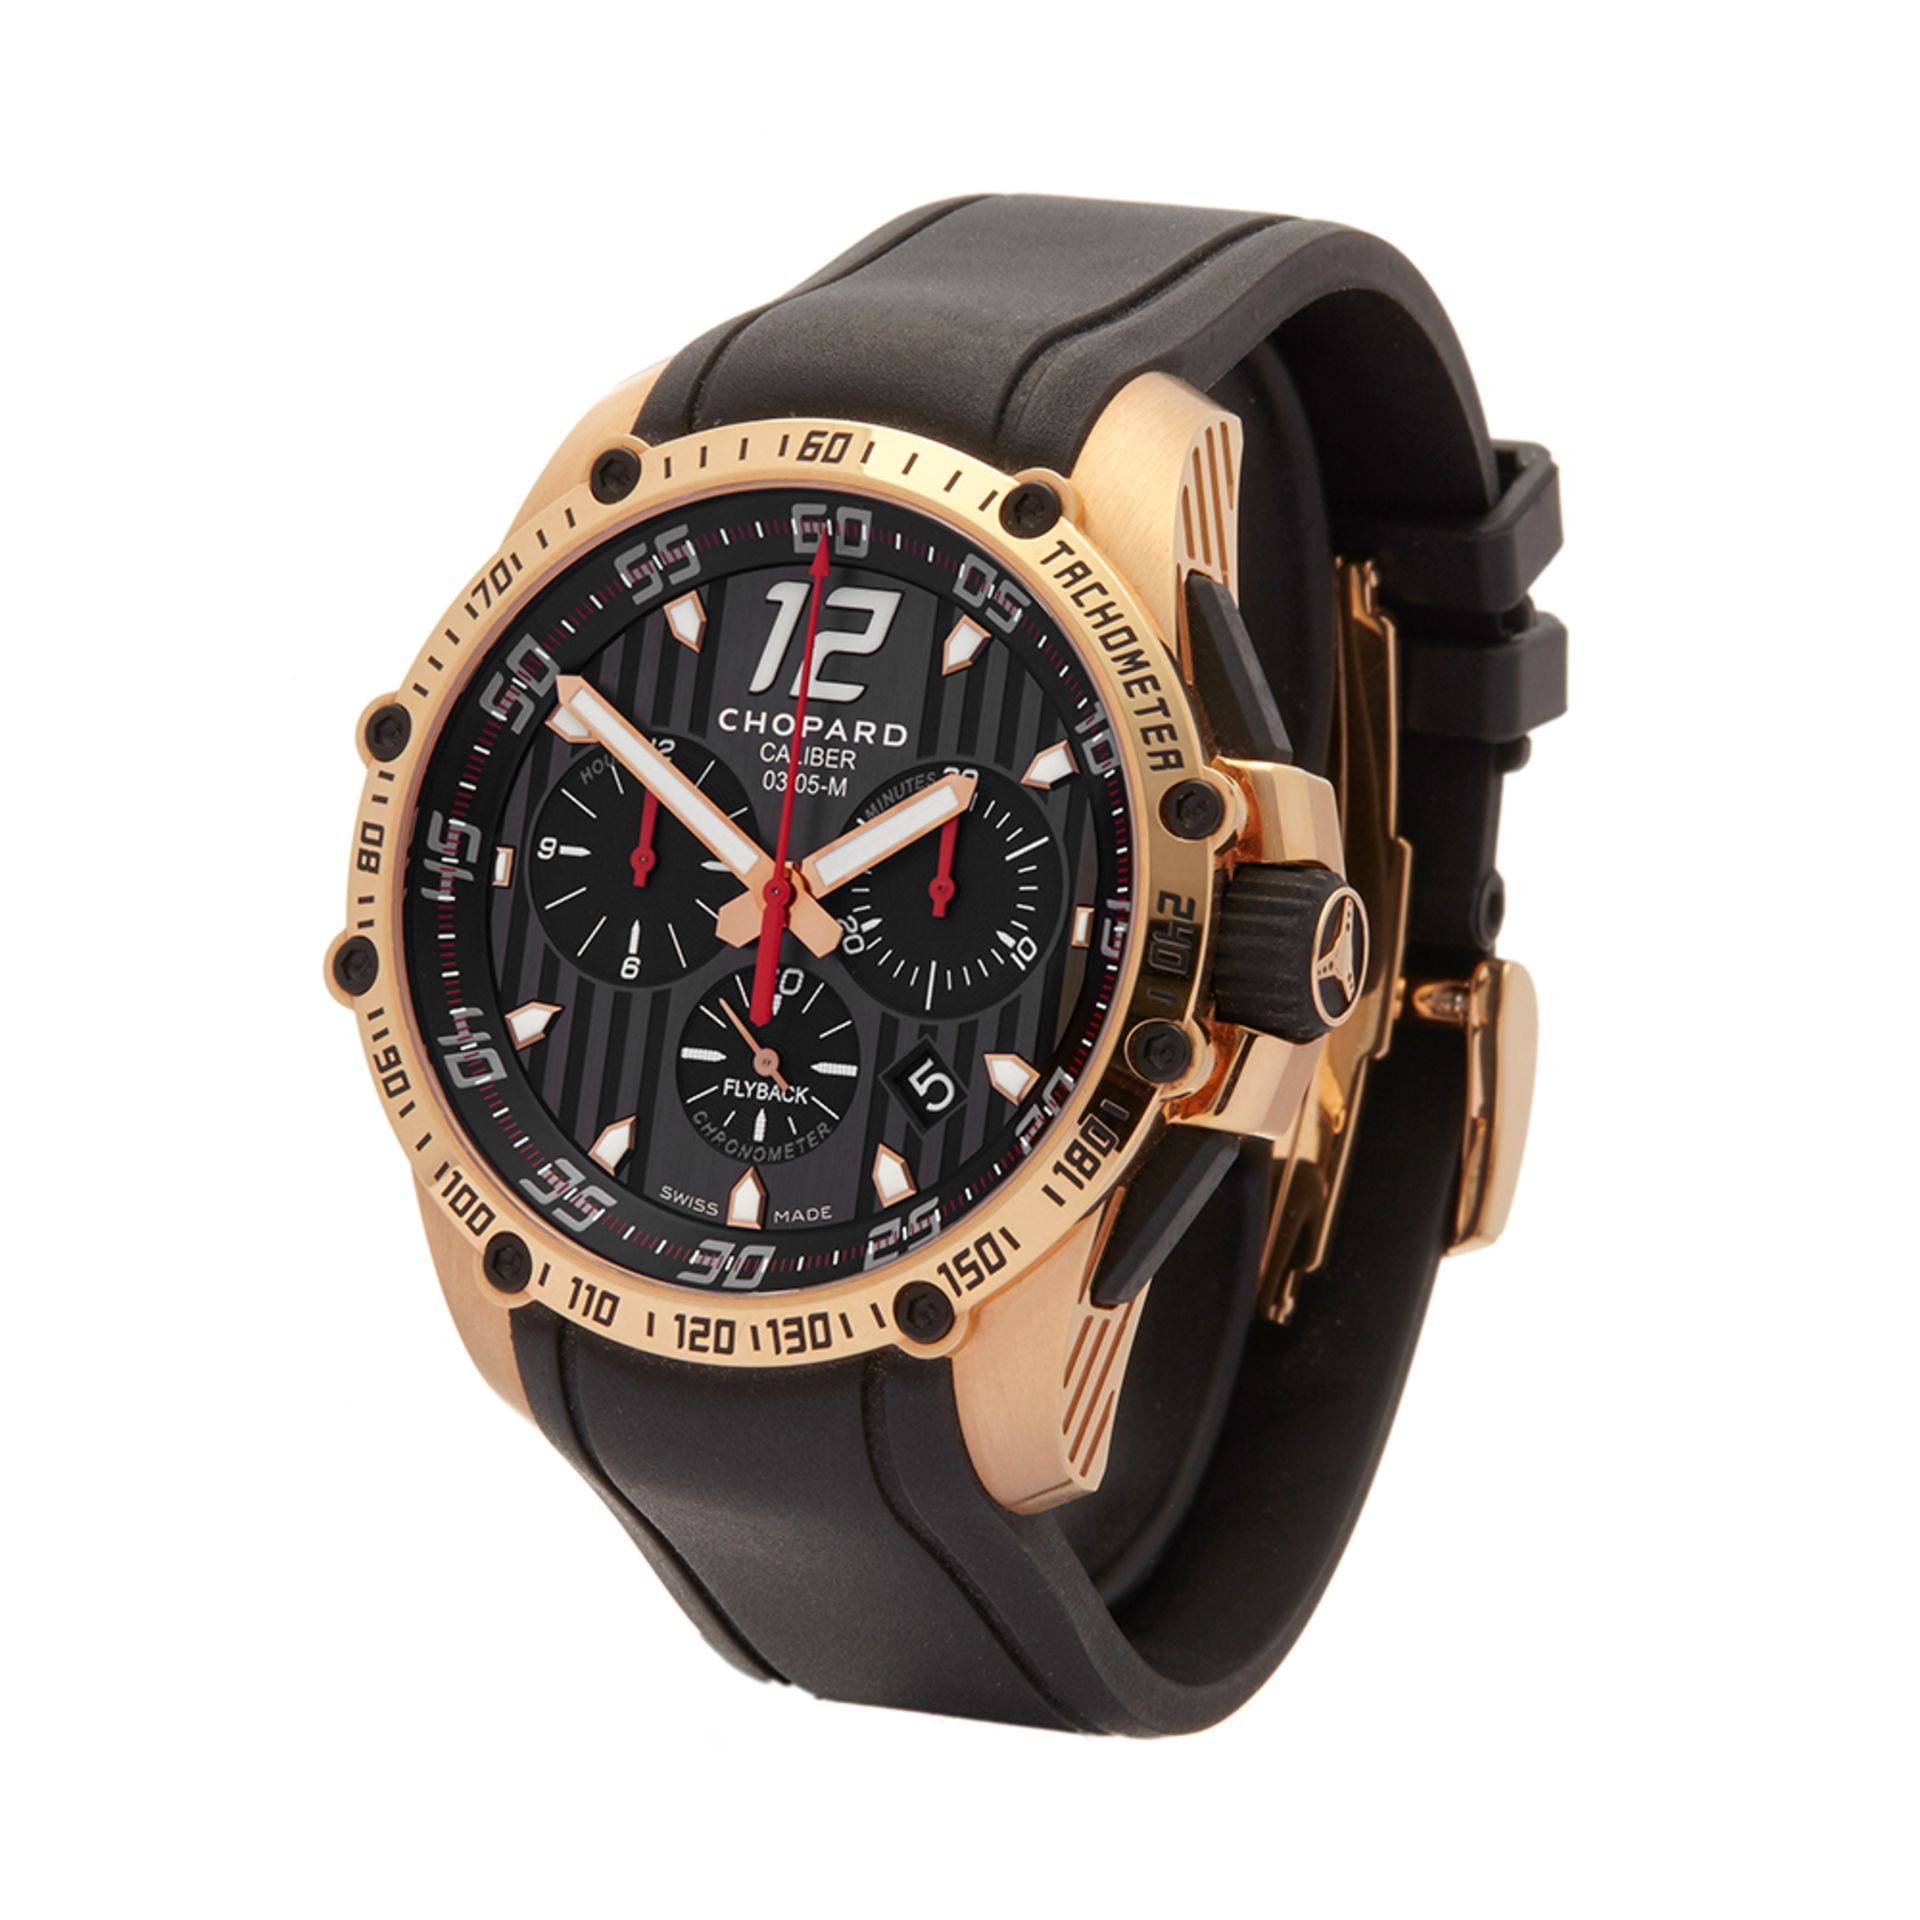 Chopard Classic Racing Superfast Chrono 2013 18K Rose Gold - 161284-5001 - Image 3 of 8